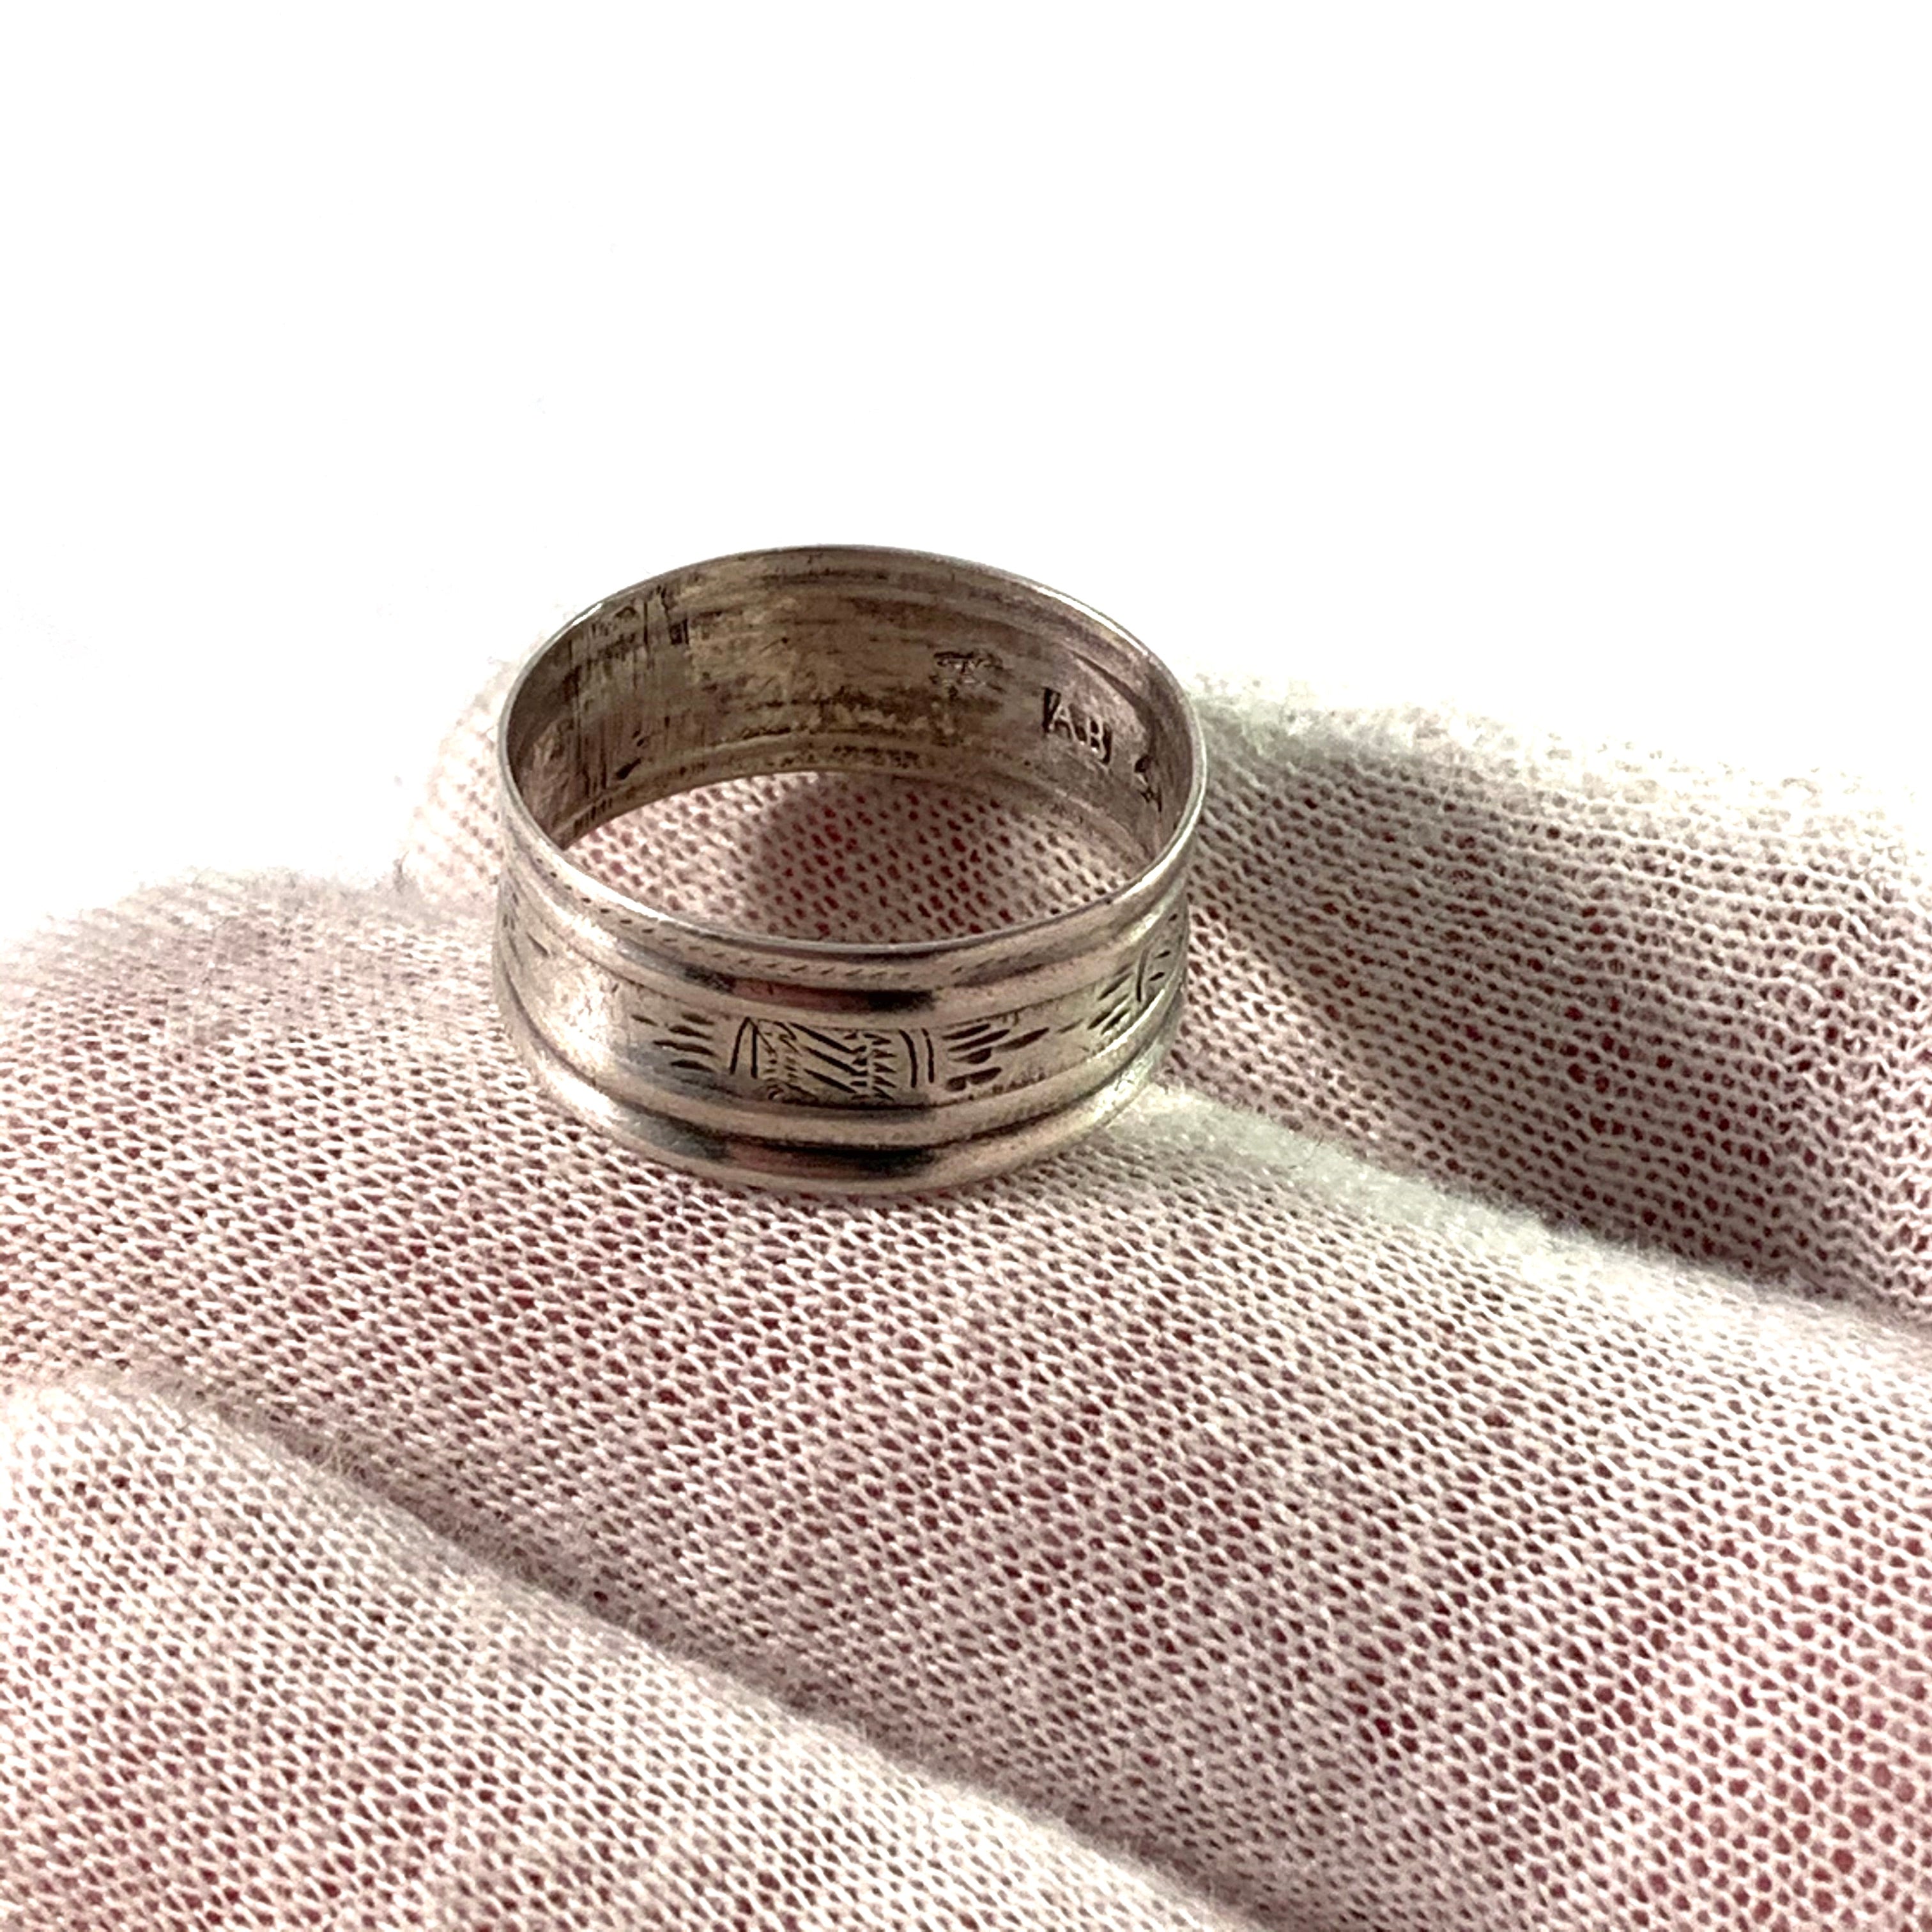 Anders Bollwij, Sweden year 1859 Solid Silver Wedding Band Ring.